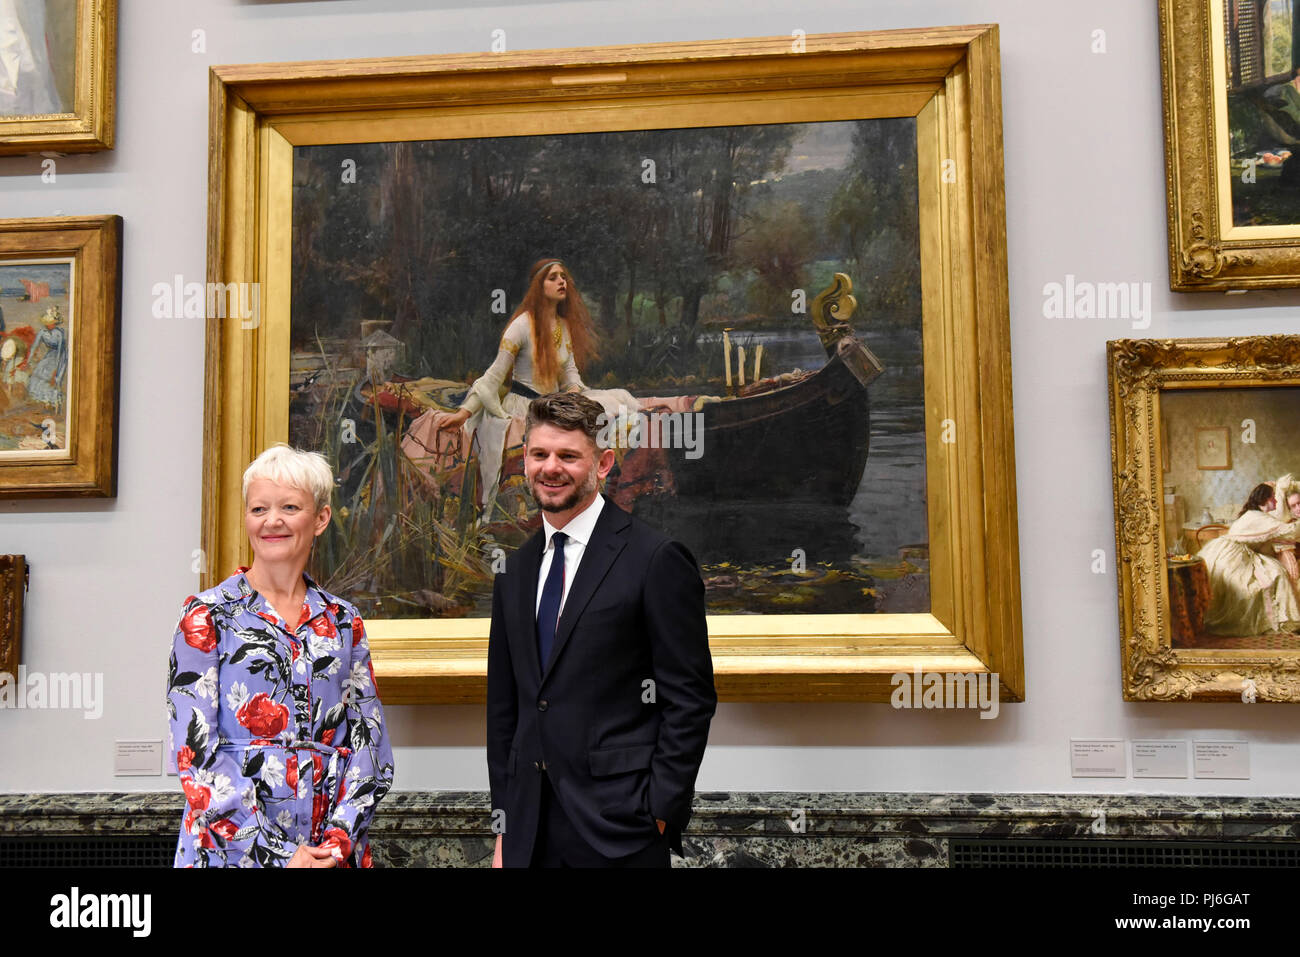 London, UK.  5 September 2018.  Maria Balshaw, Director of Tate, and Nick Mitzevich, Director of the National Gallery of Australia, pose with 'The Lady of Shalott', 1888, by John William Waterhouse, at Tate Britain, to mark the launch of a major new exhibition at the National Gallery of Australia (NGA) in December 2018.  Over forty Pre-Raphaelite works will be loaned by Tate to NGA, which have never been shown in Australia until now, including 'Ophelia', 1851-52, by John Everett Millais and 'The Lady of Shalott', 1888, by John William Waterhouse. Credit: Stephen Chung / Alamy Live News Stock Photo